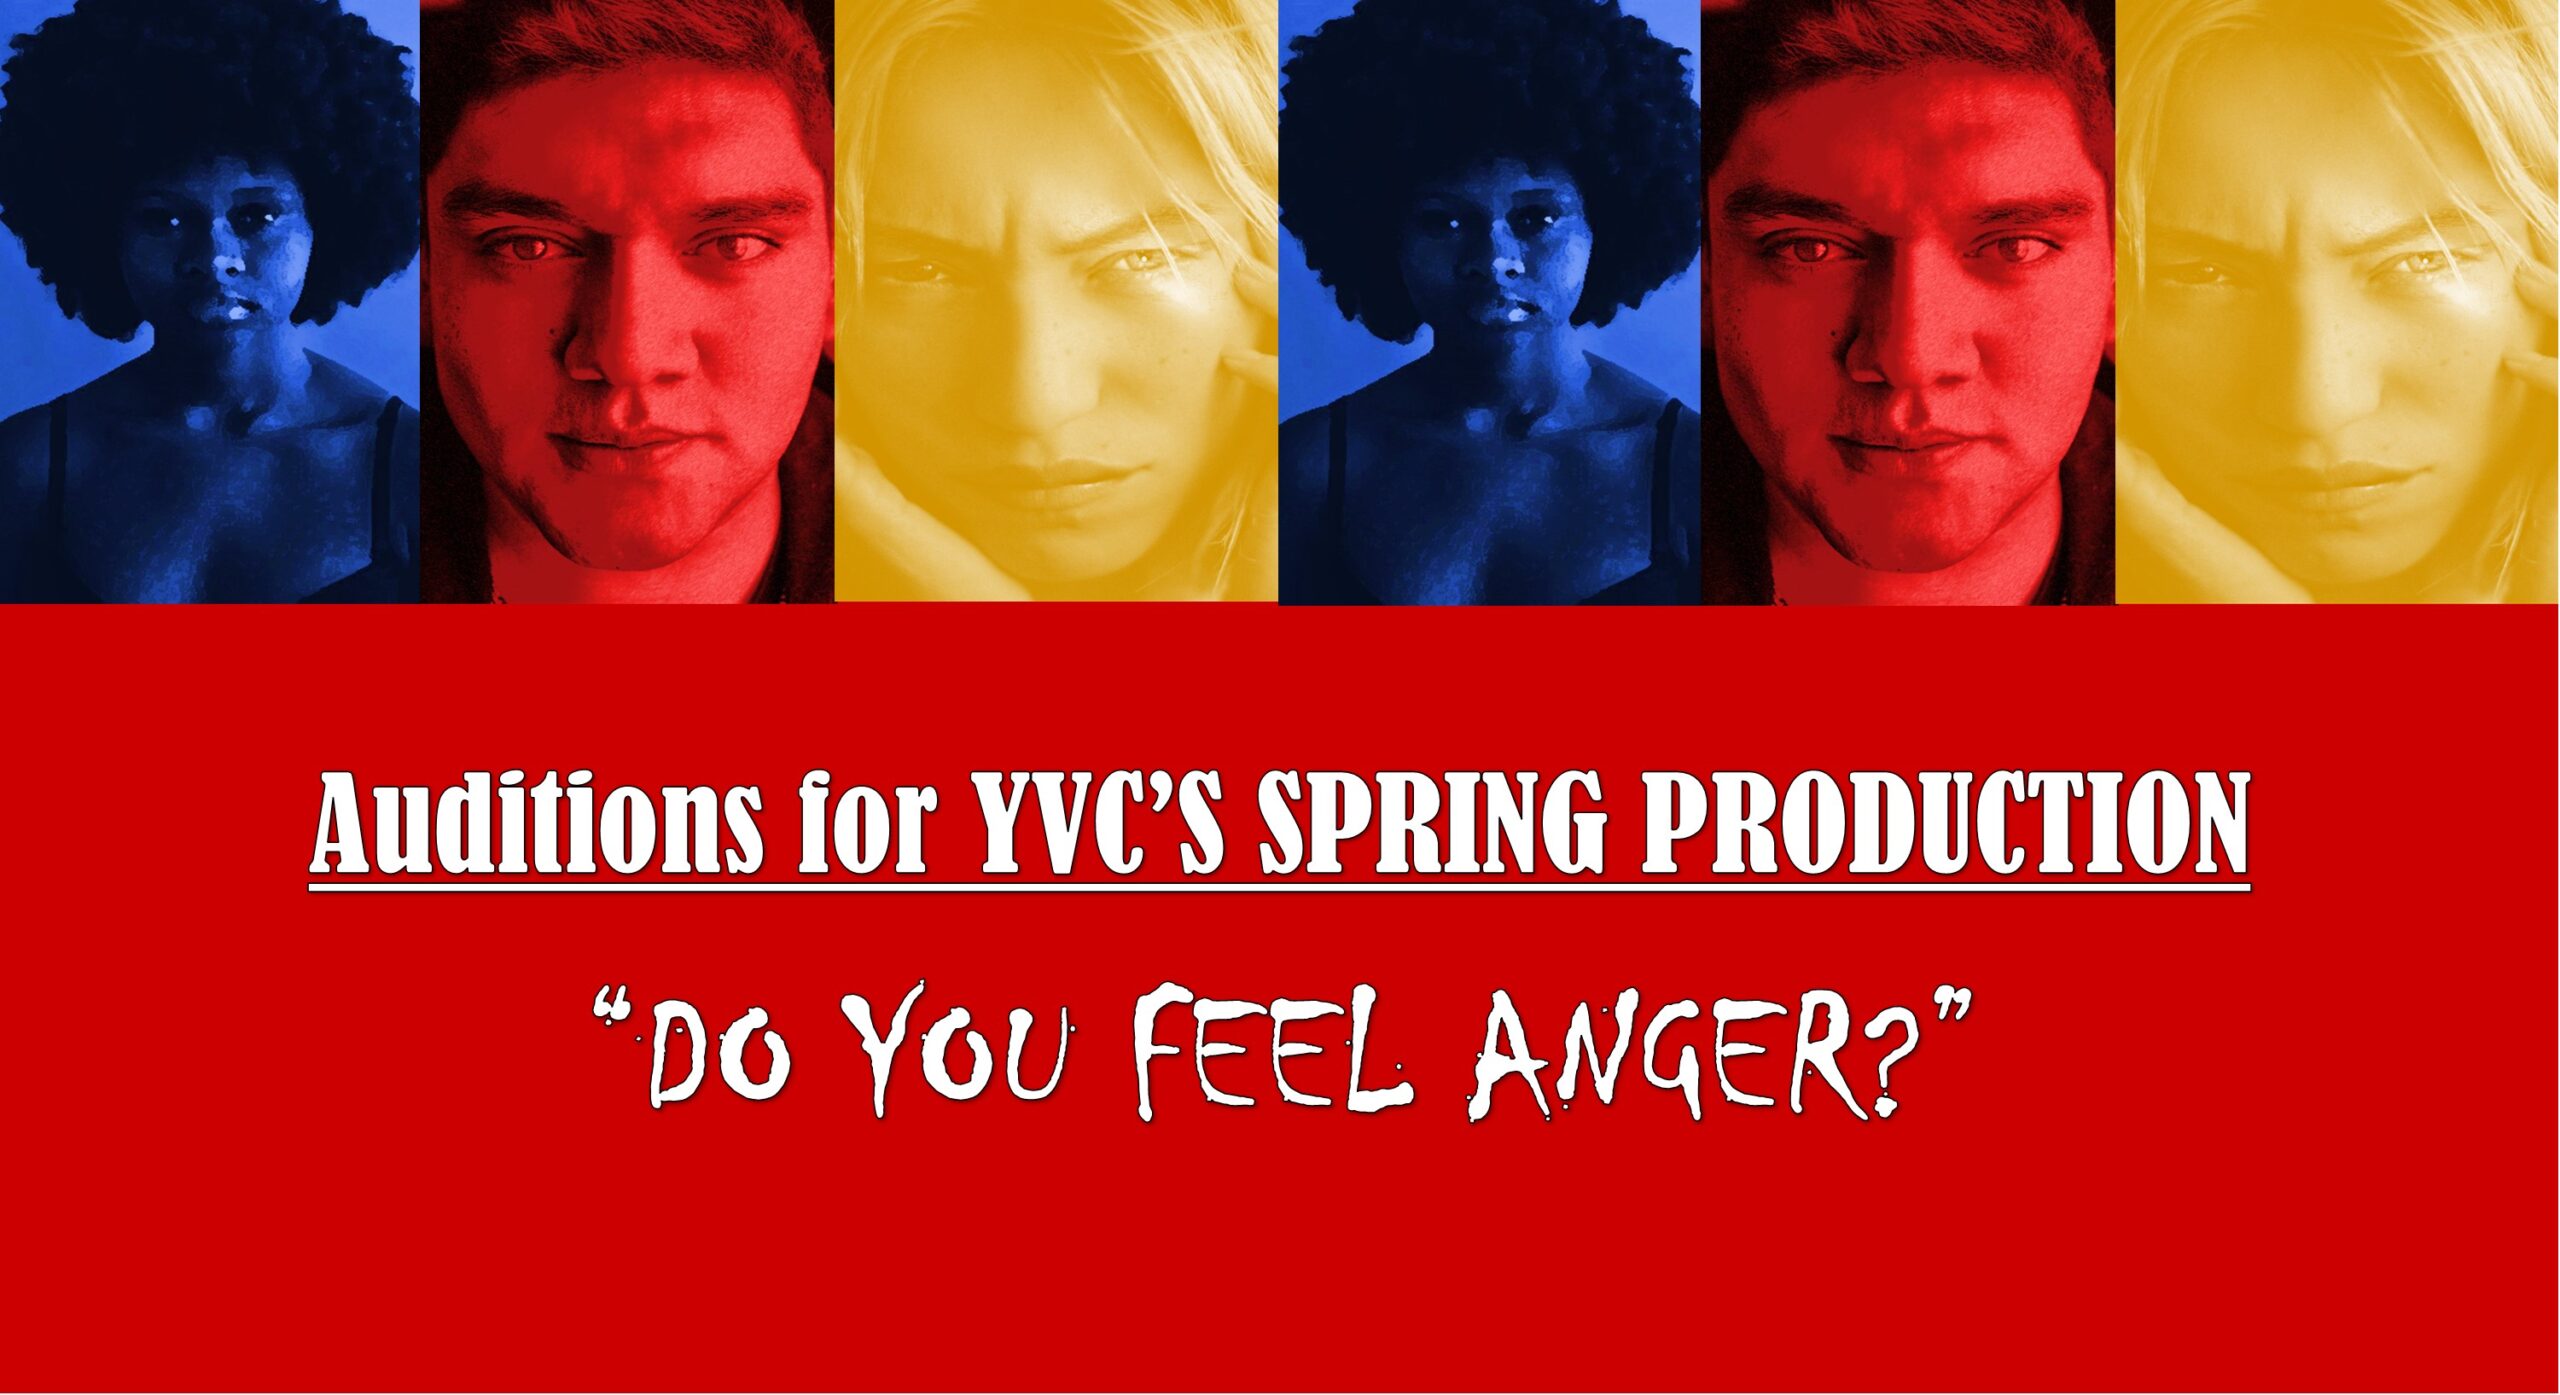 Auditions for YVC's Spring Production Do You Feel Anger?